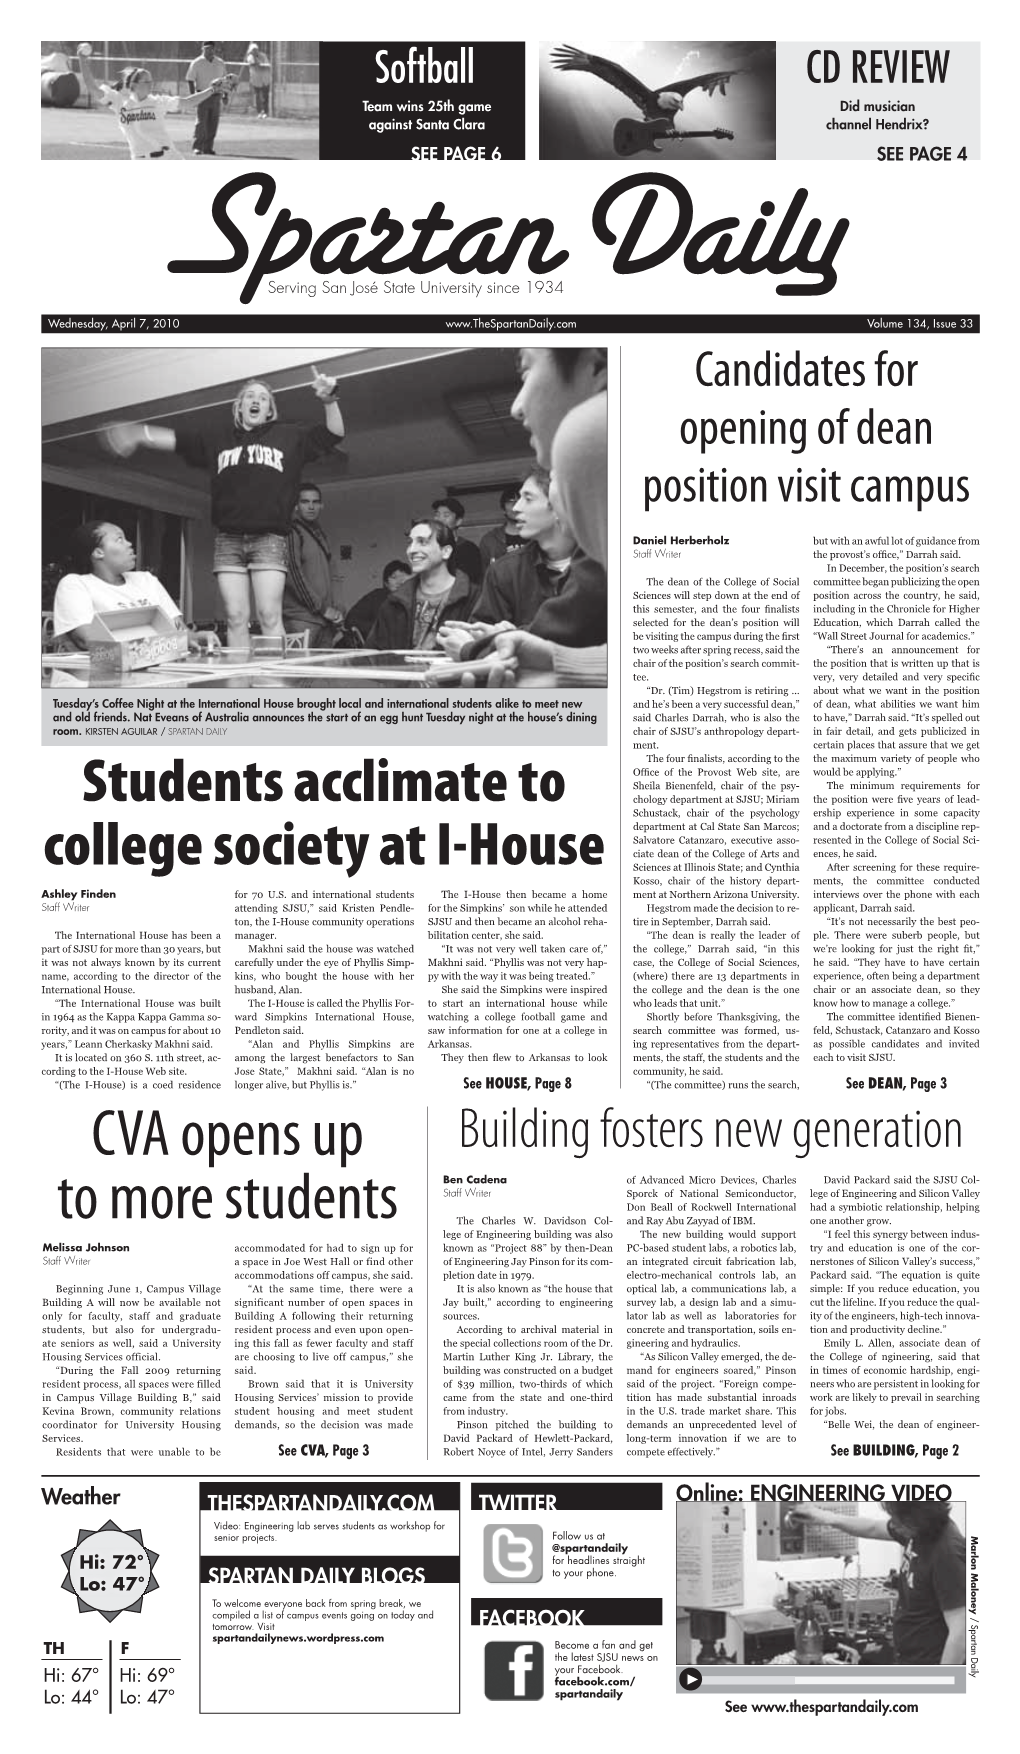 SPARTAN DAILY Chair of SJSU’S Anthropology Depart- in Fair Detail, and Gets Publicized in Ment